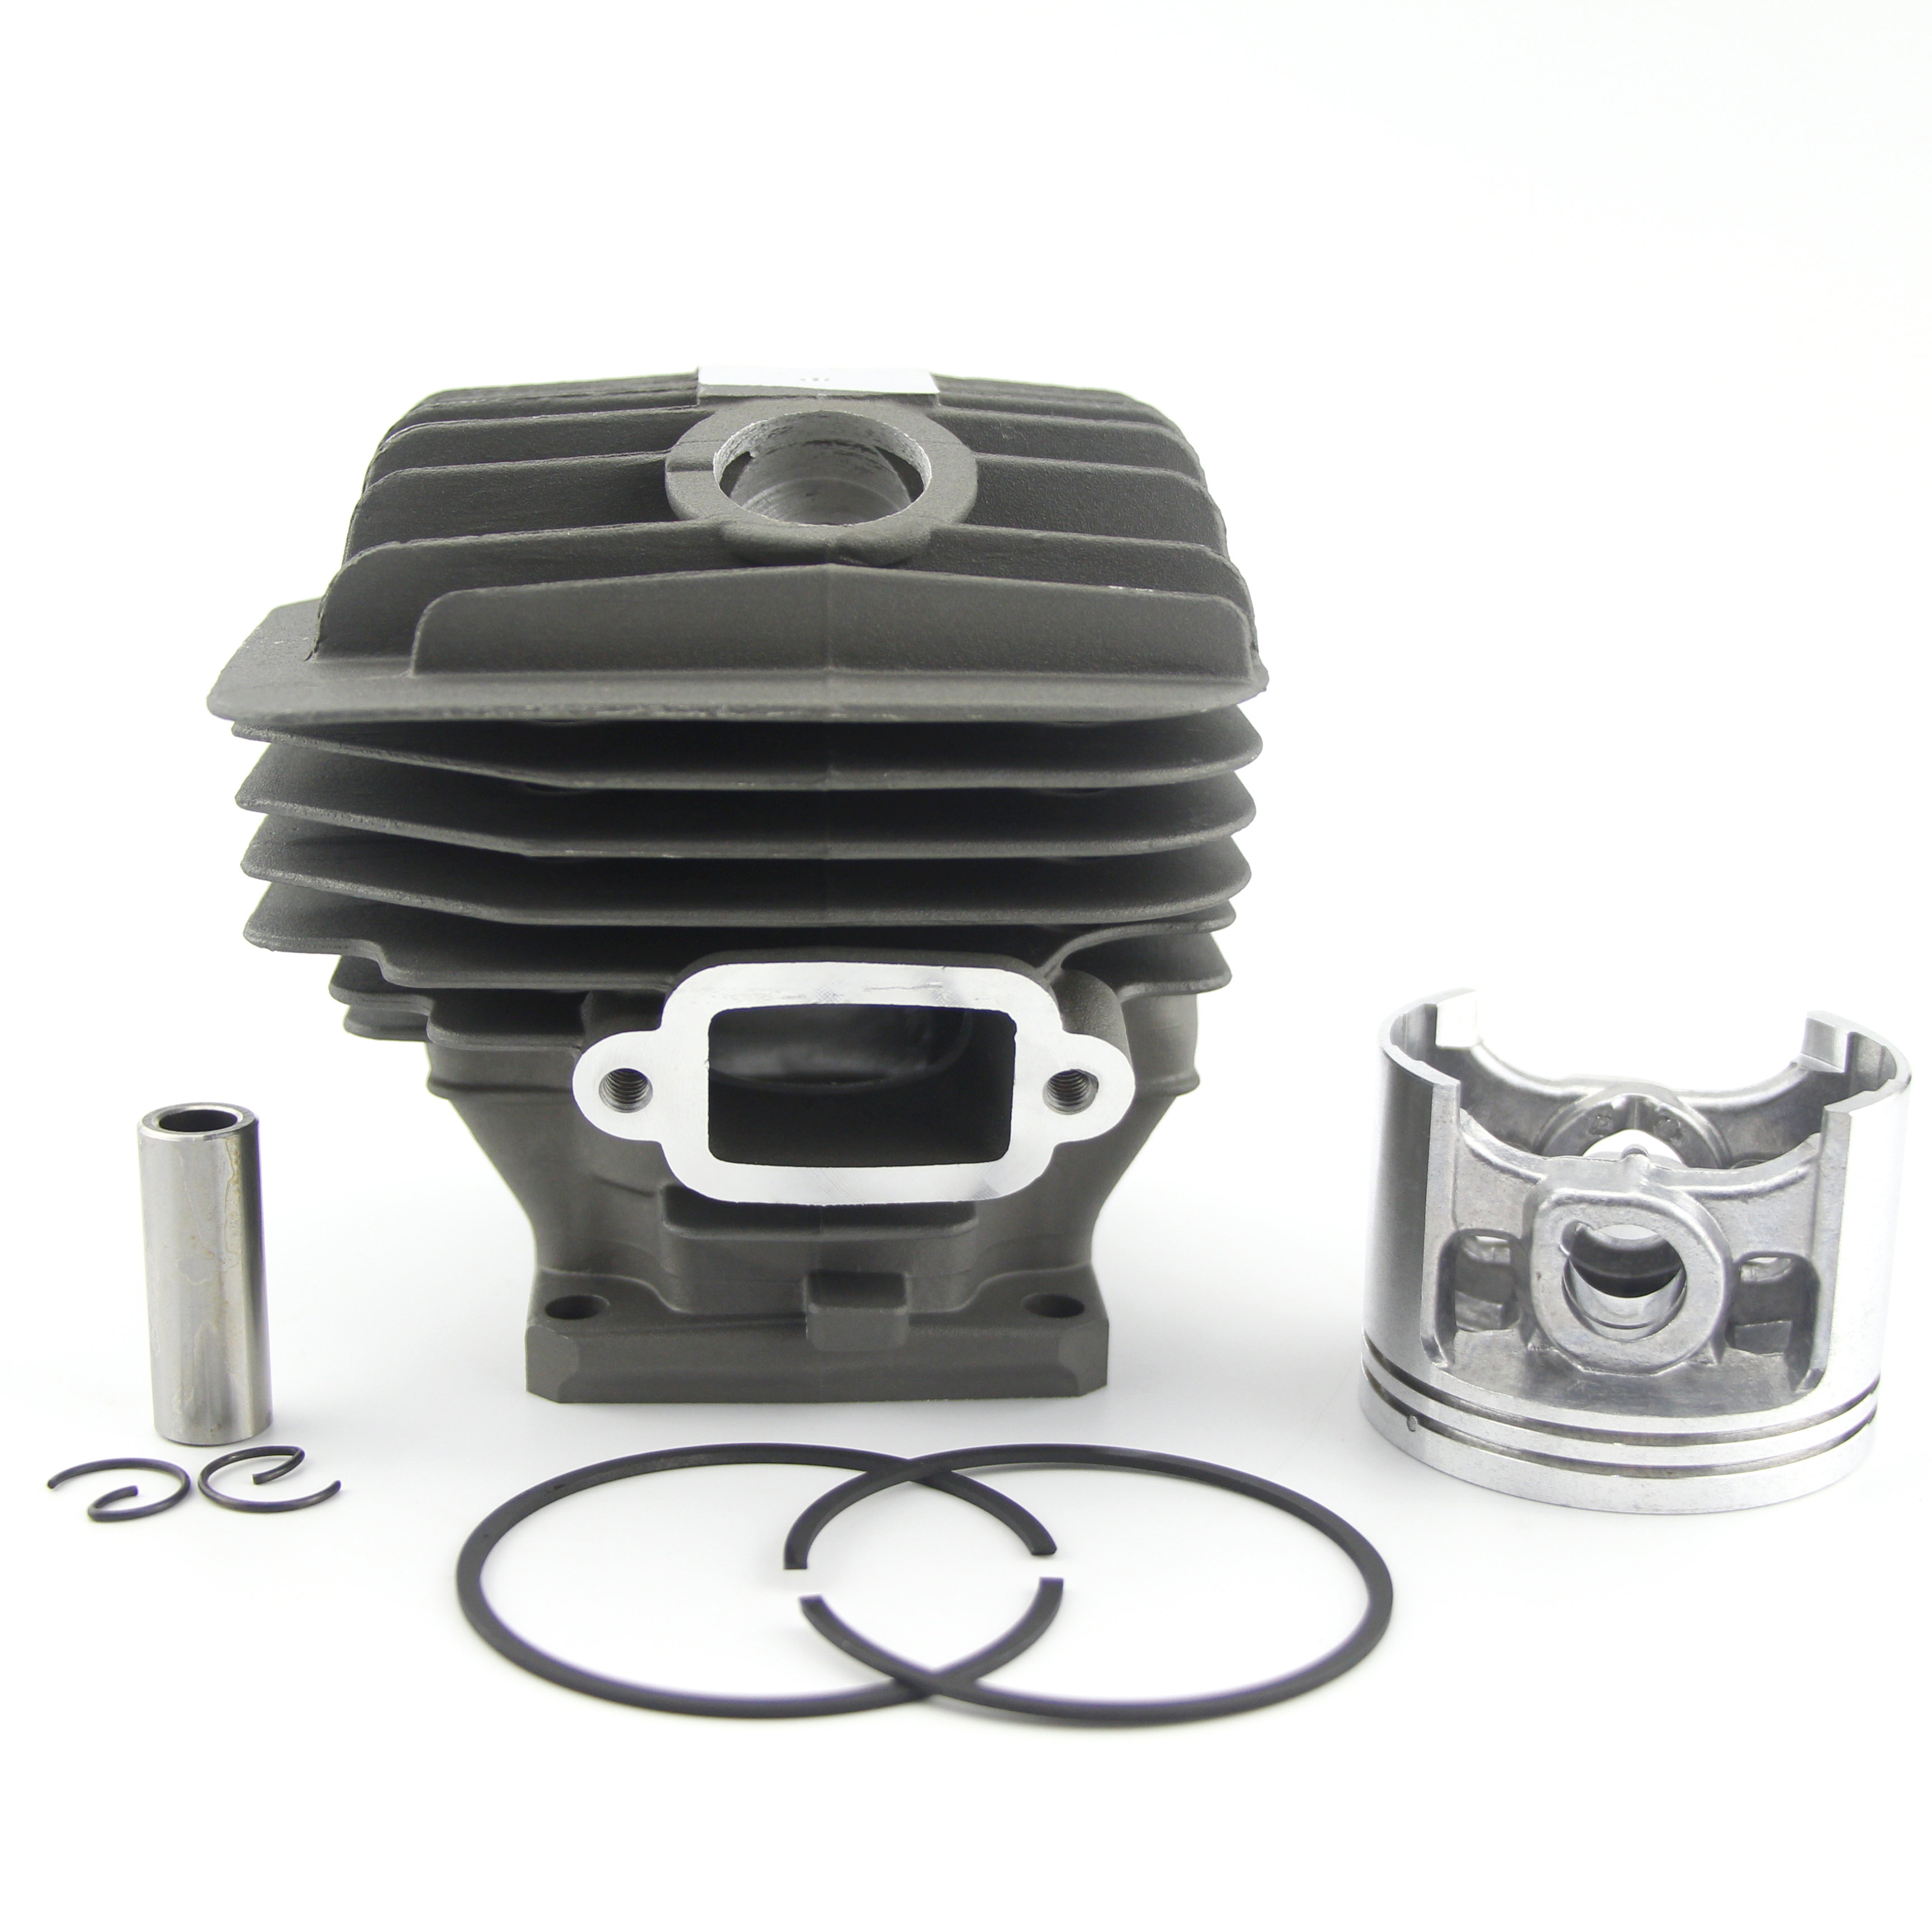 Big Bore 54MM Cylinder Piston Kit For Stihl 046 MS460 Chainsaw 1128 020 1221 With Pin Ring Circlip